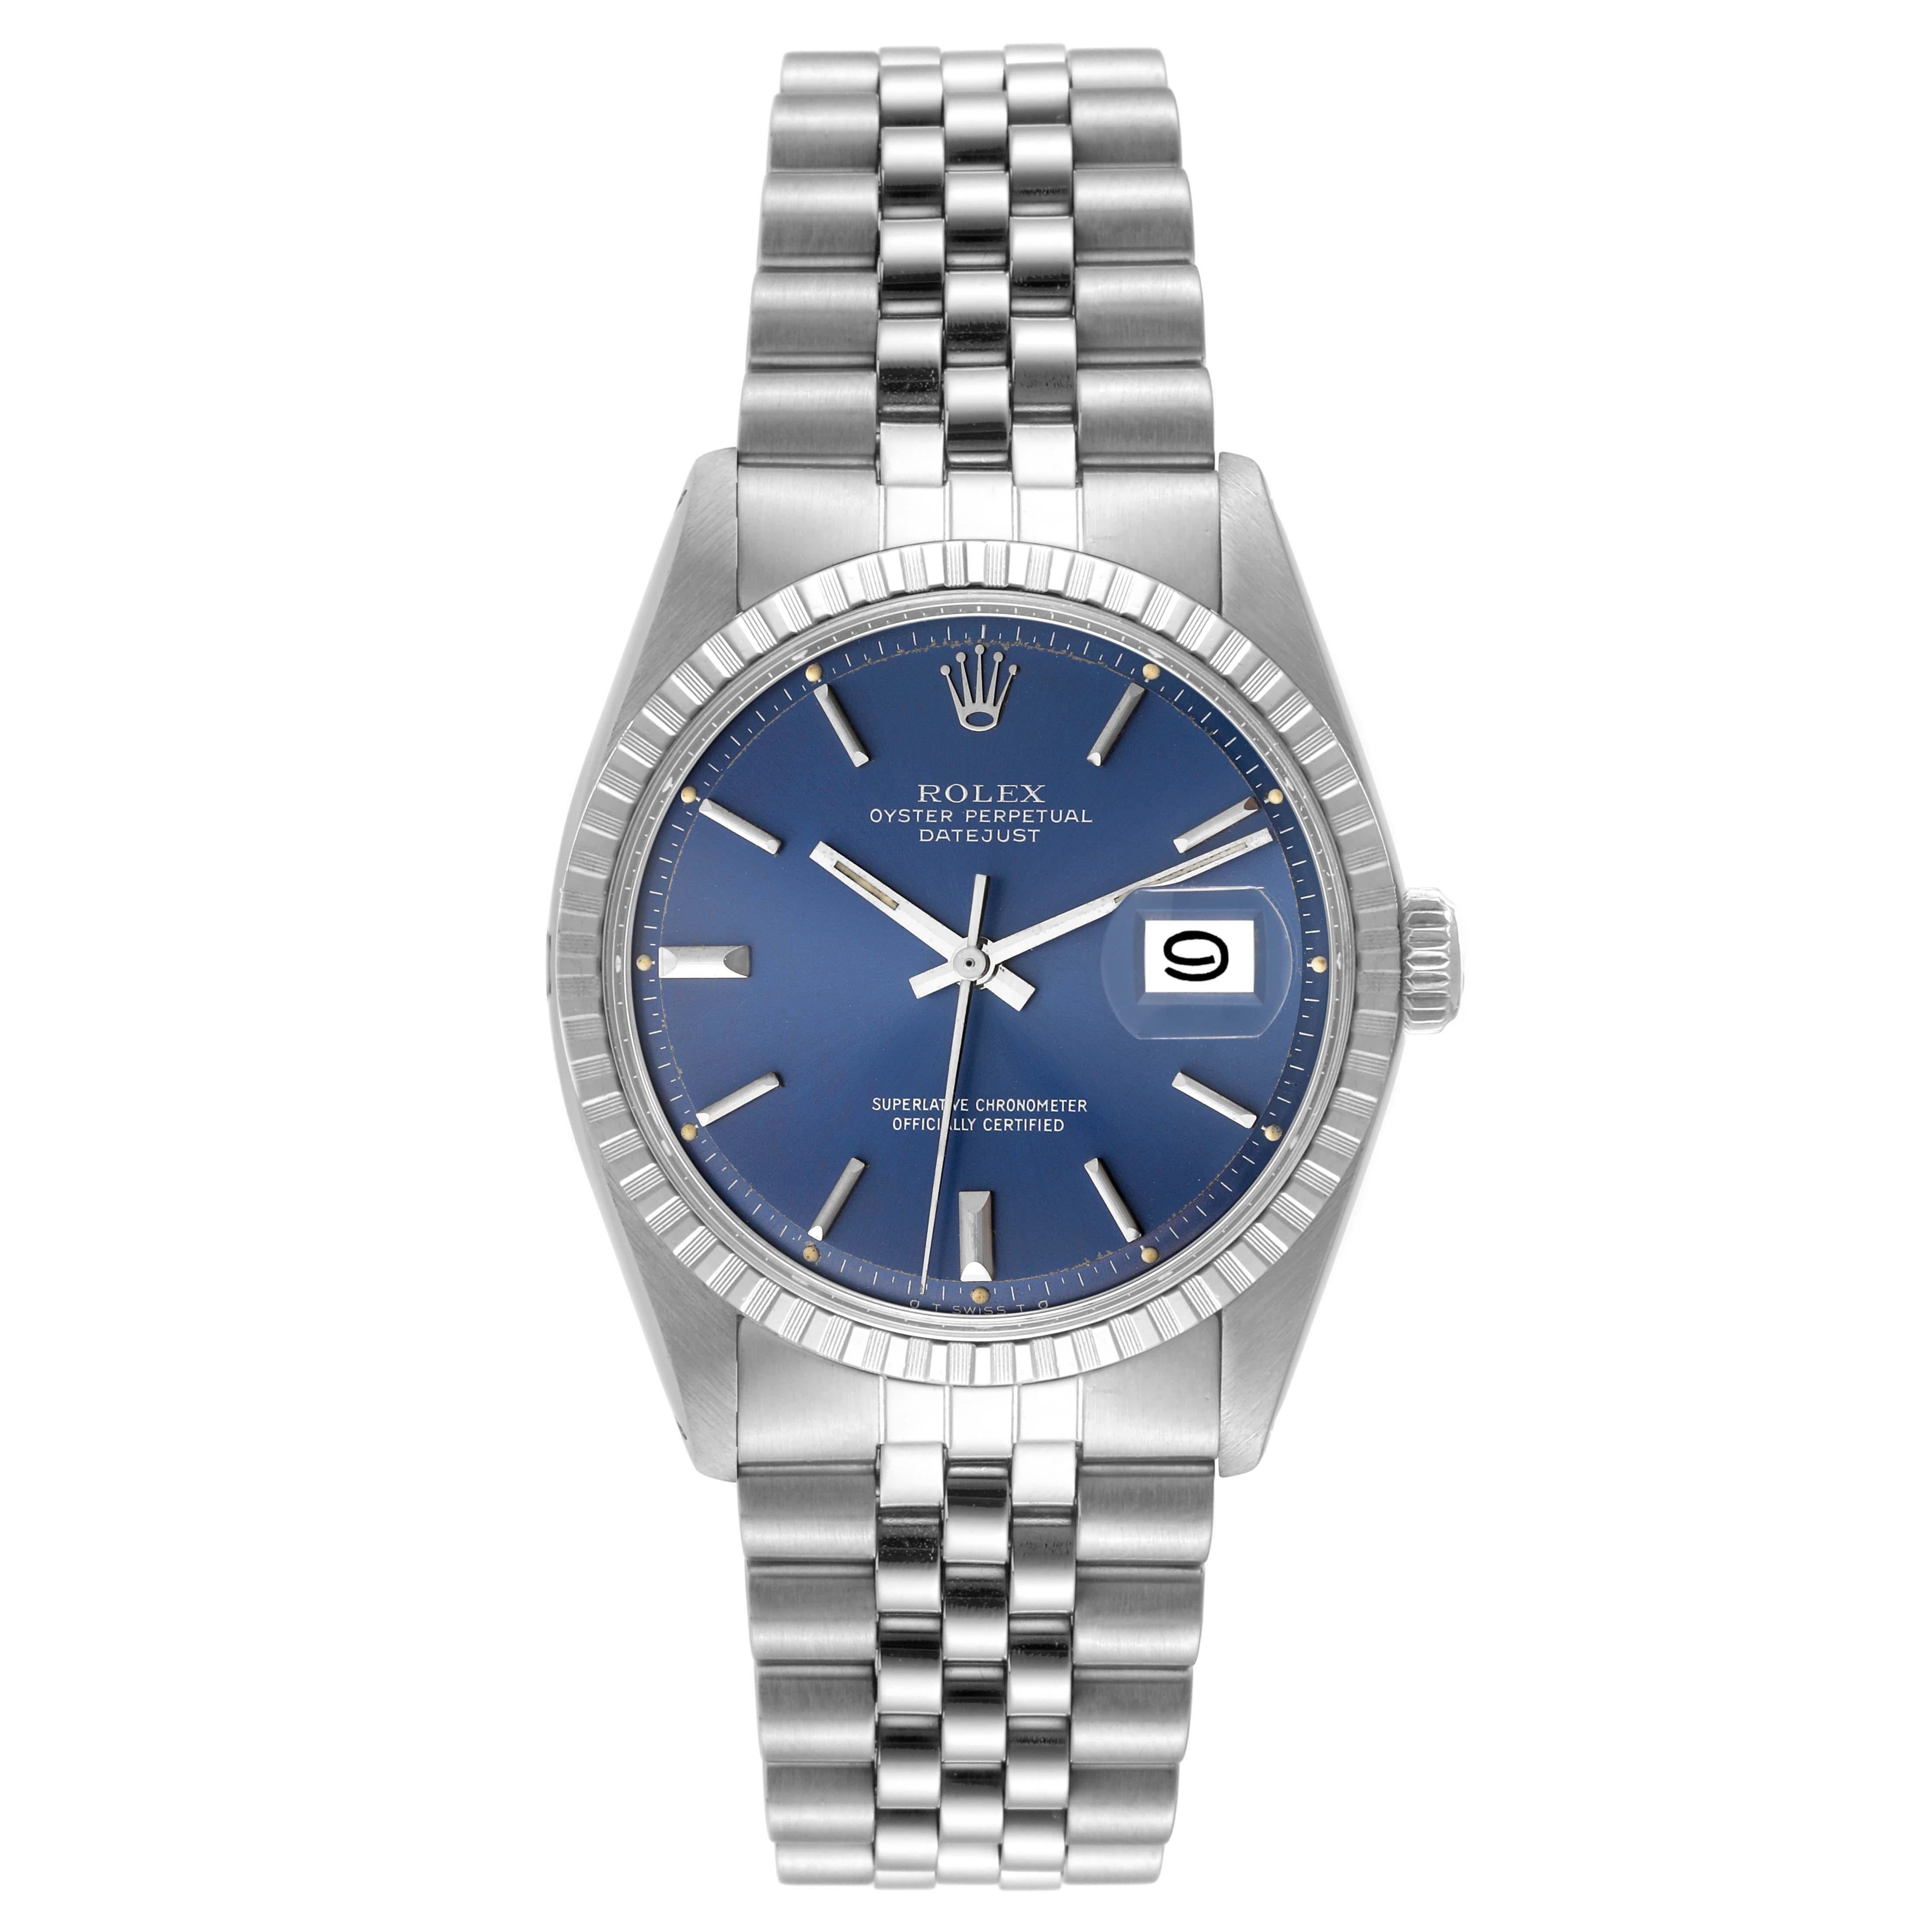 Rolex Datejust Blue Dial Engine Turned Bezel Vintage Steel Mens Watch 1603. Officially certified chronometer automatic self-winding movement. Stainless steel oyster case 36.0 mm in diameter. Rolex logo on the crown. Stainless steel engine turned